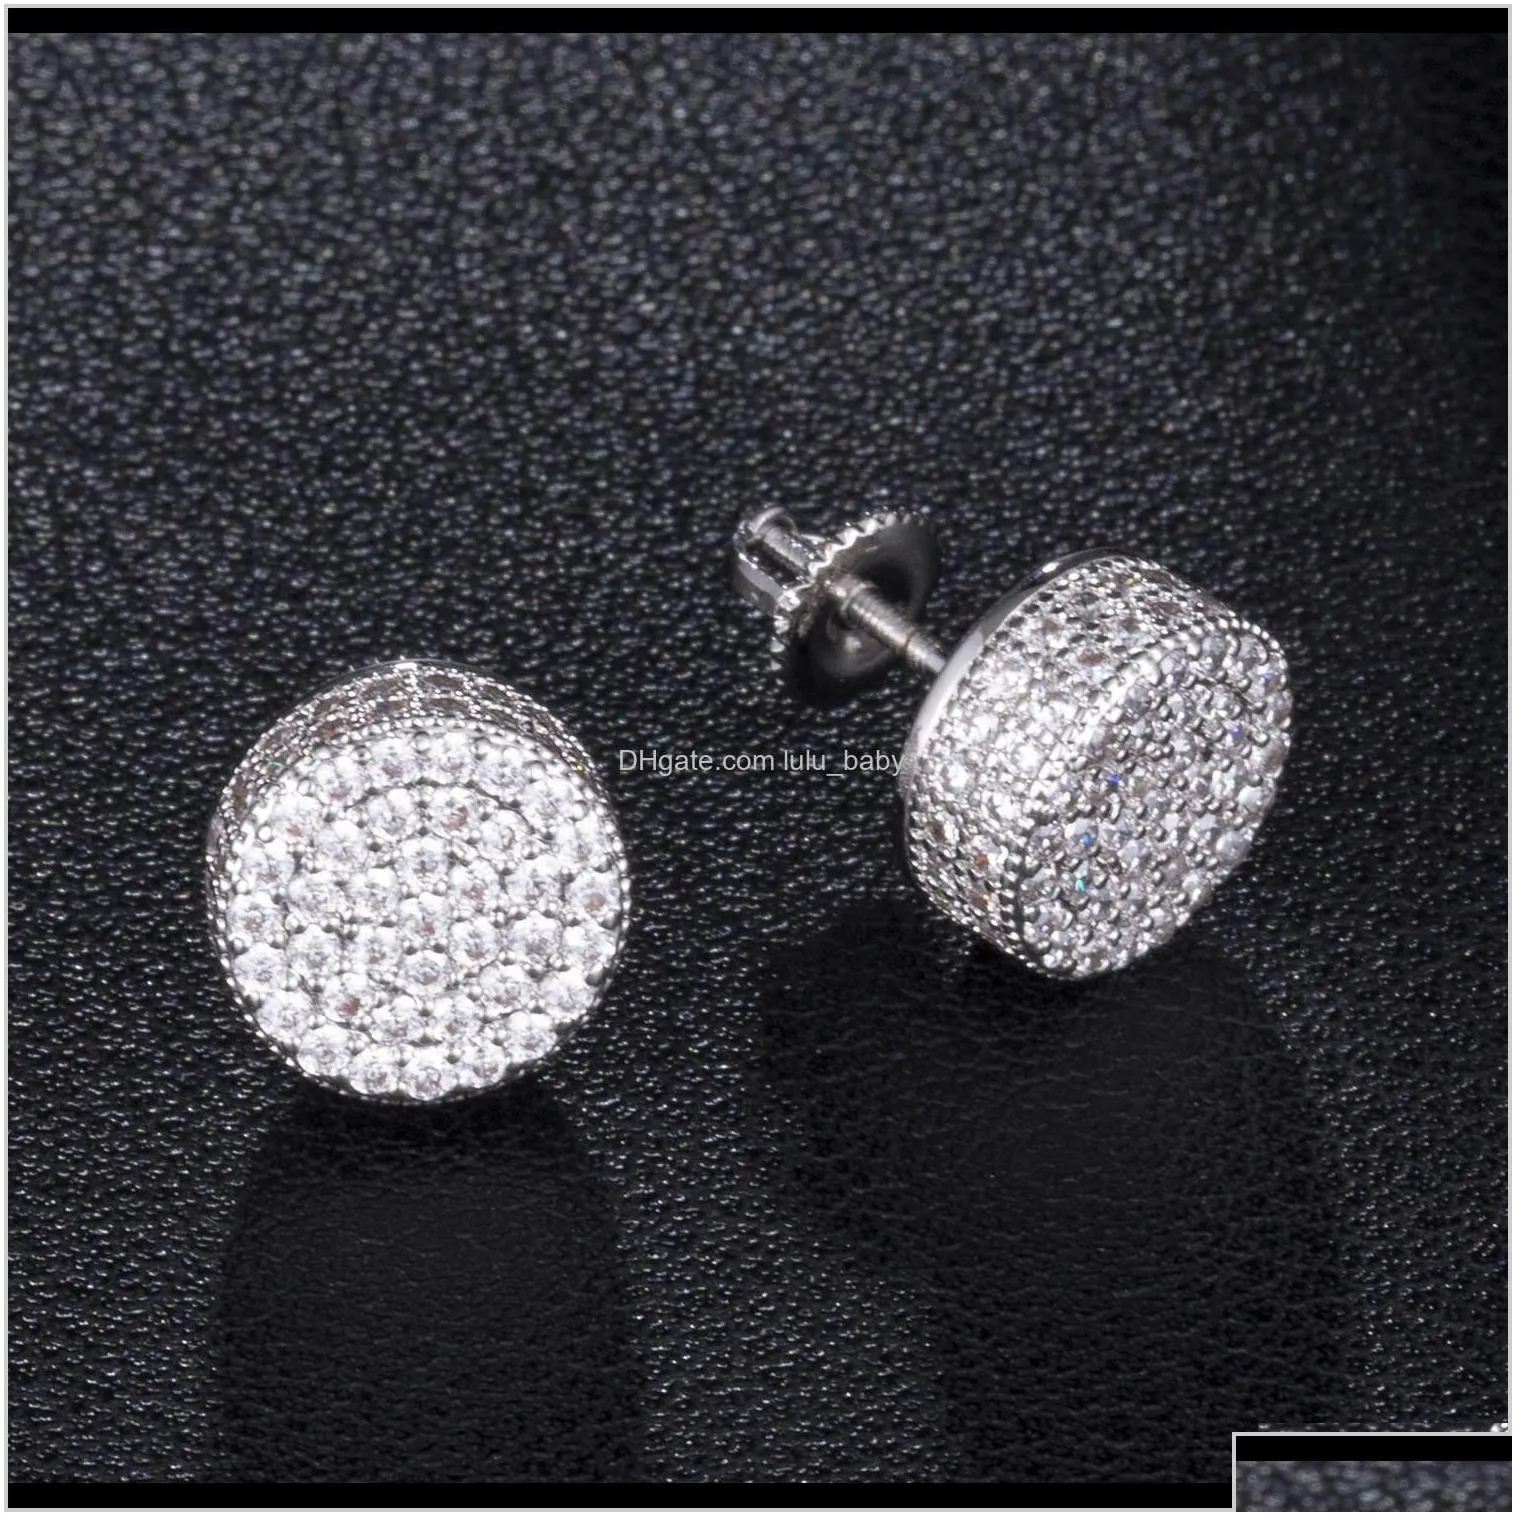 Dz Mens Hip Hop Iced Out Micro Paved Cz Round Earrings For Male Party Jewelry Brincos Cgtix Hbprt